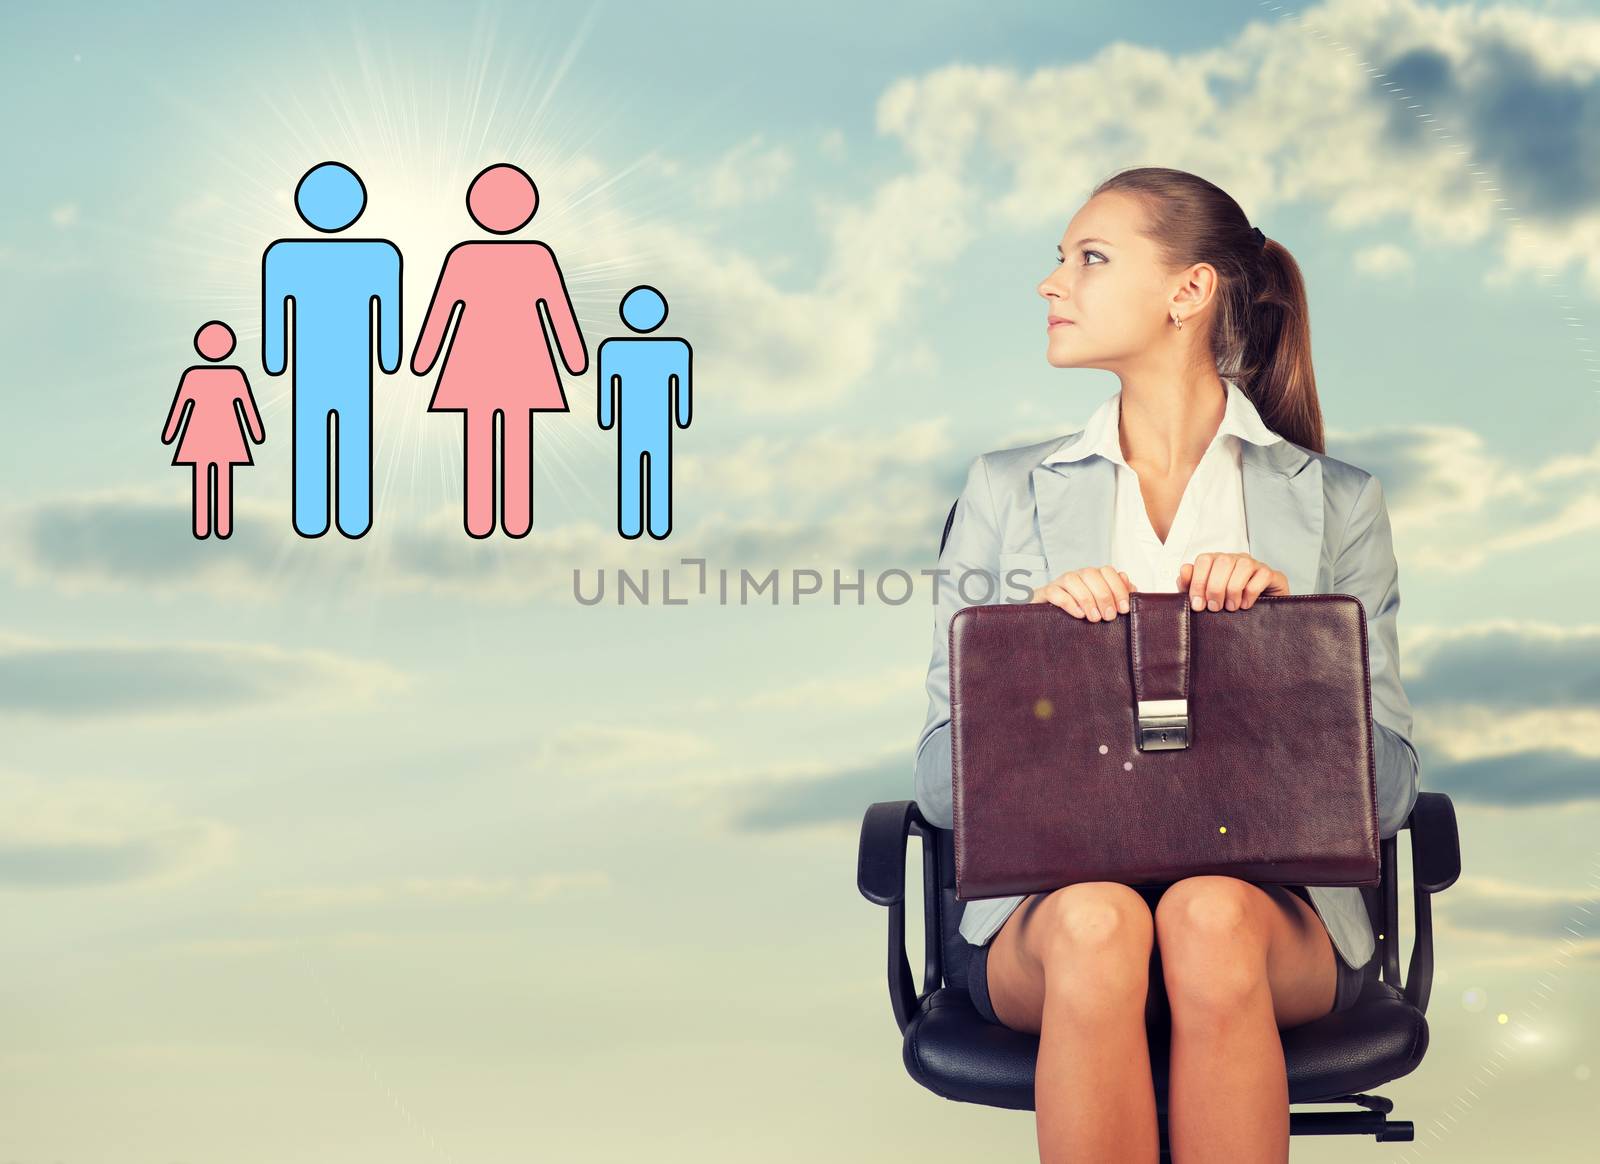 Business woman in skirt, blouse and jacket, sitting on chair, holding briefcase imagines family. Against background of sky, clouds by cherezoff